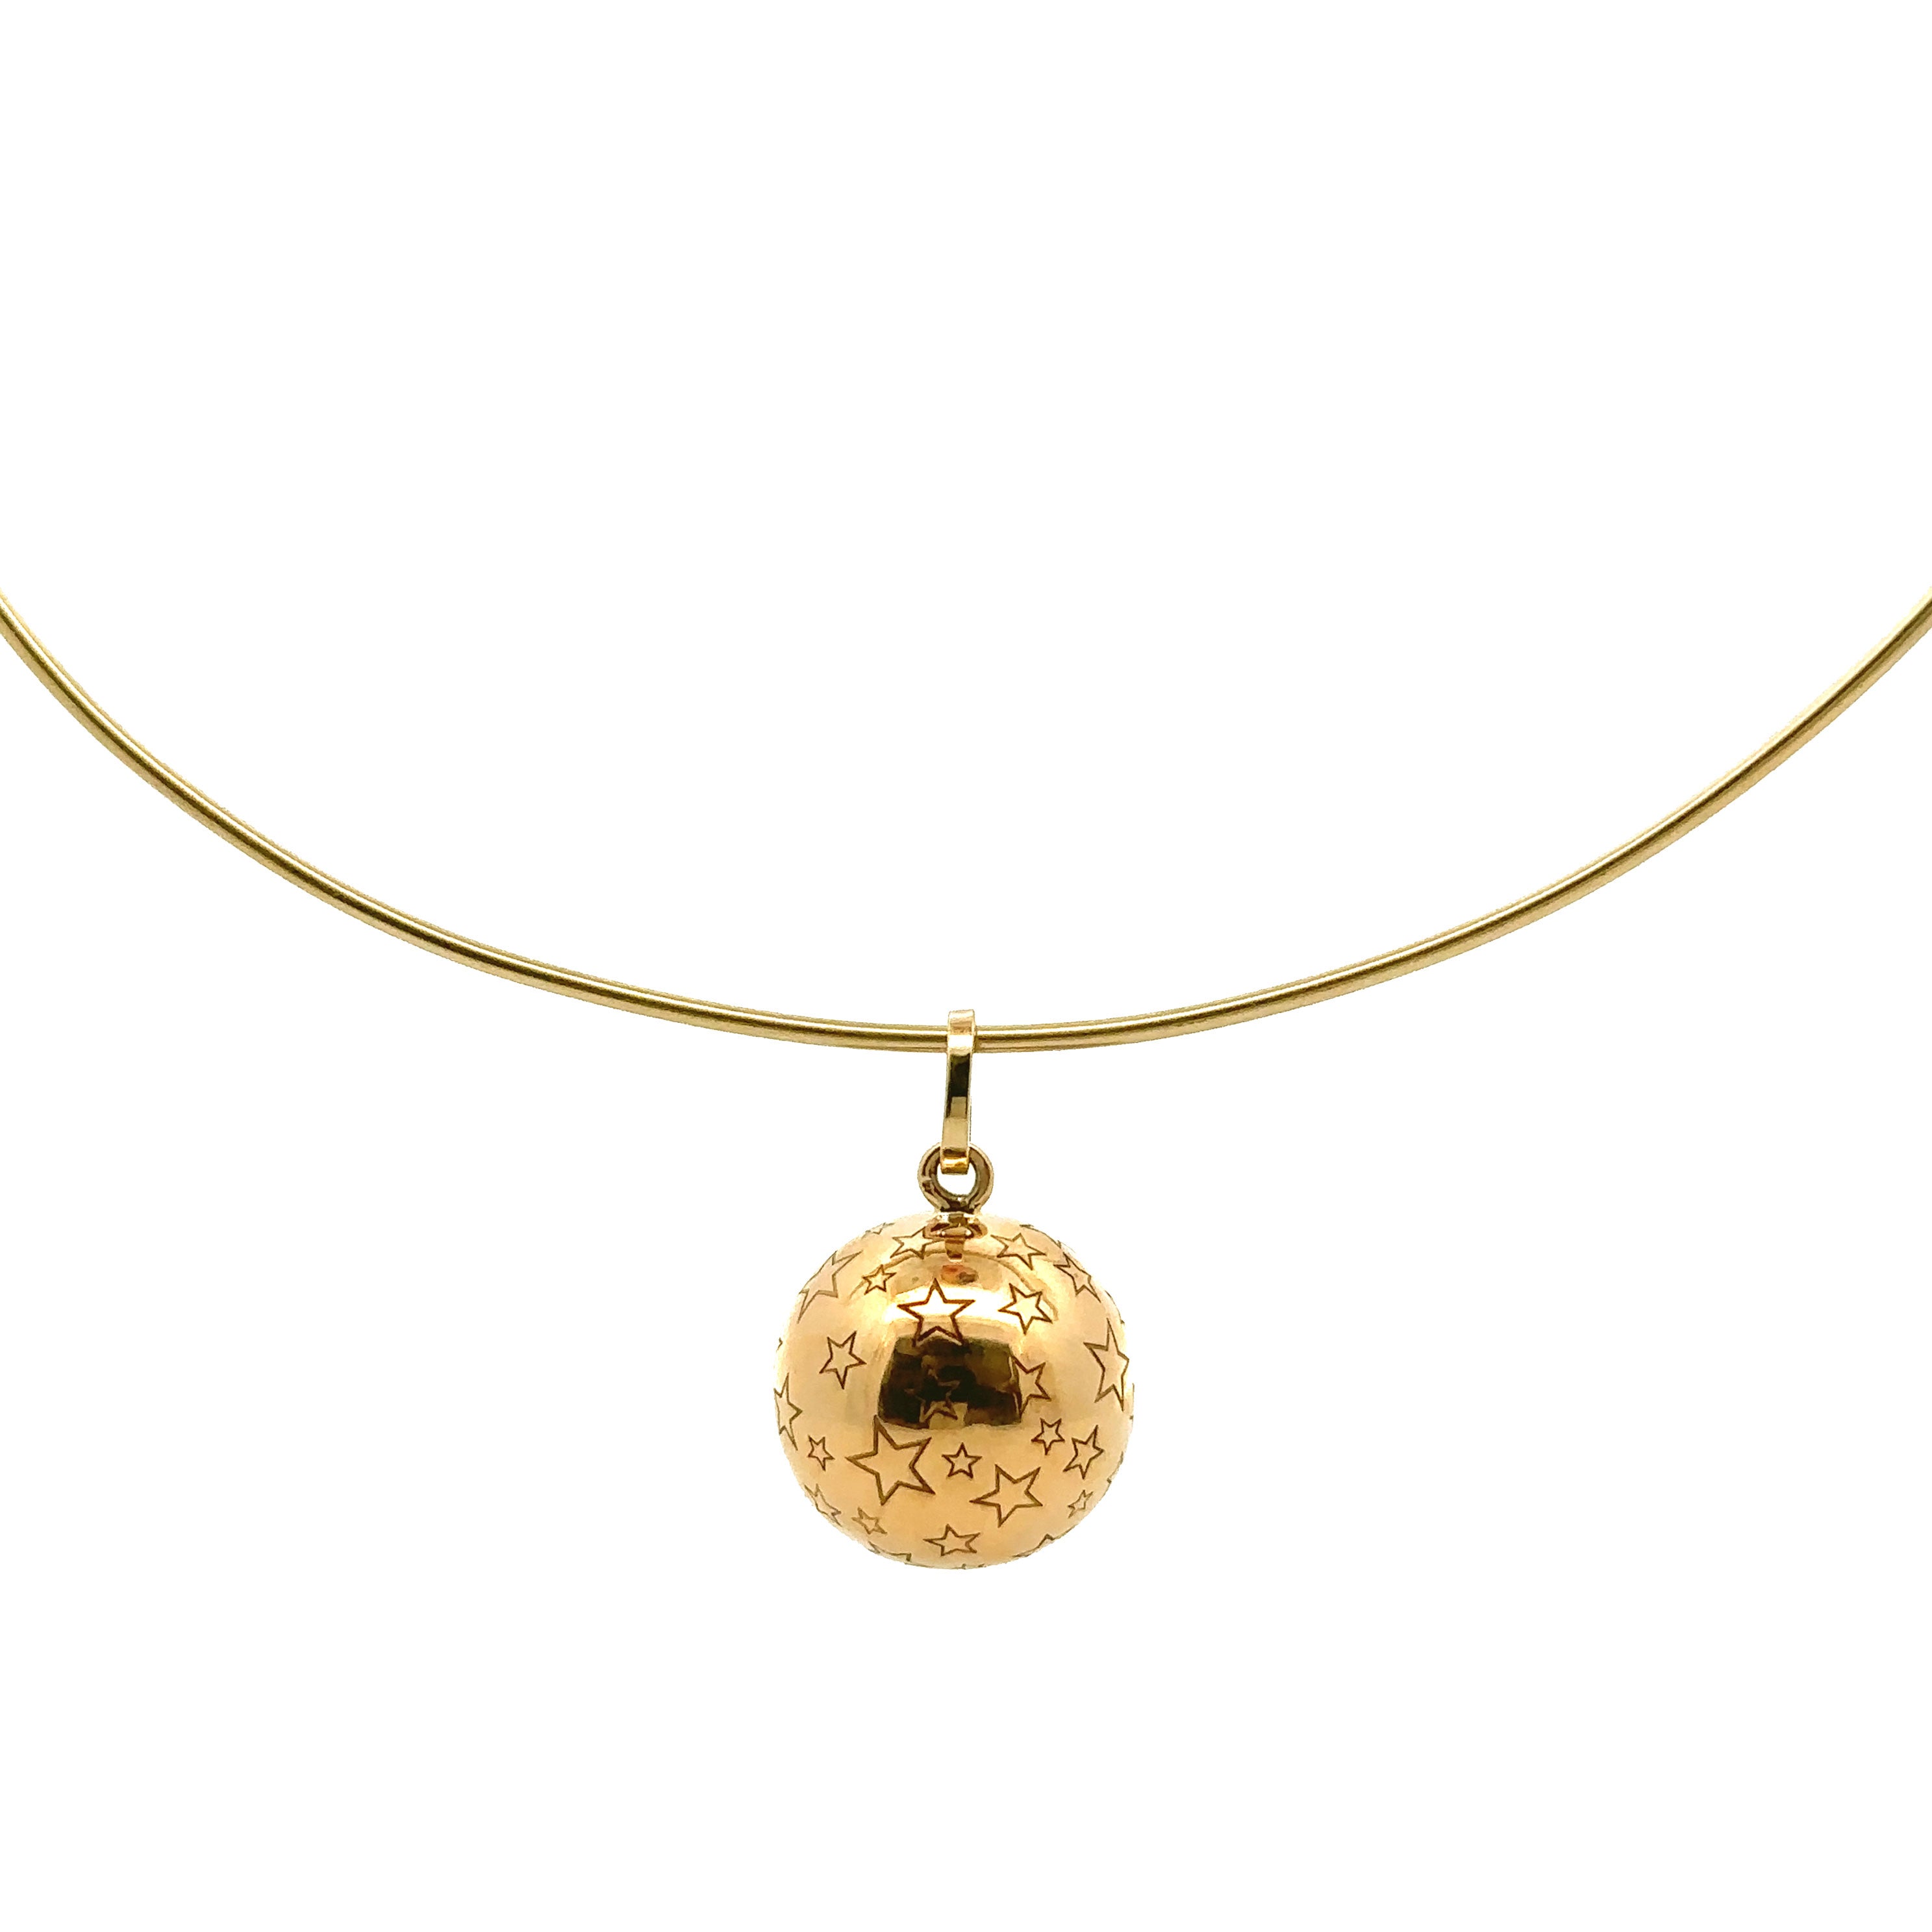 Vintage Gold Ball with Stars Charm - Be On Park